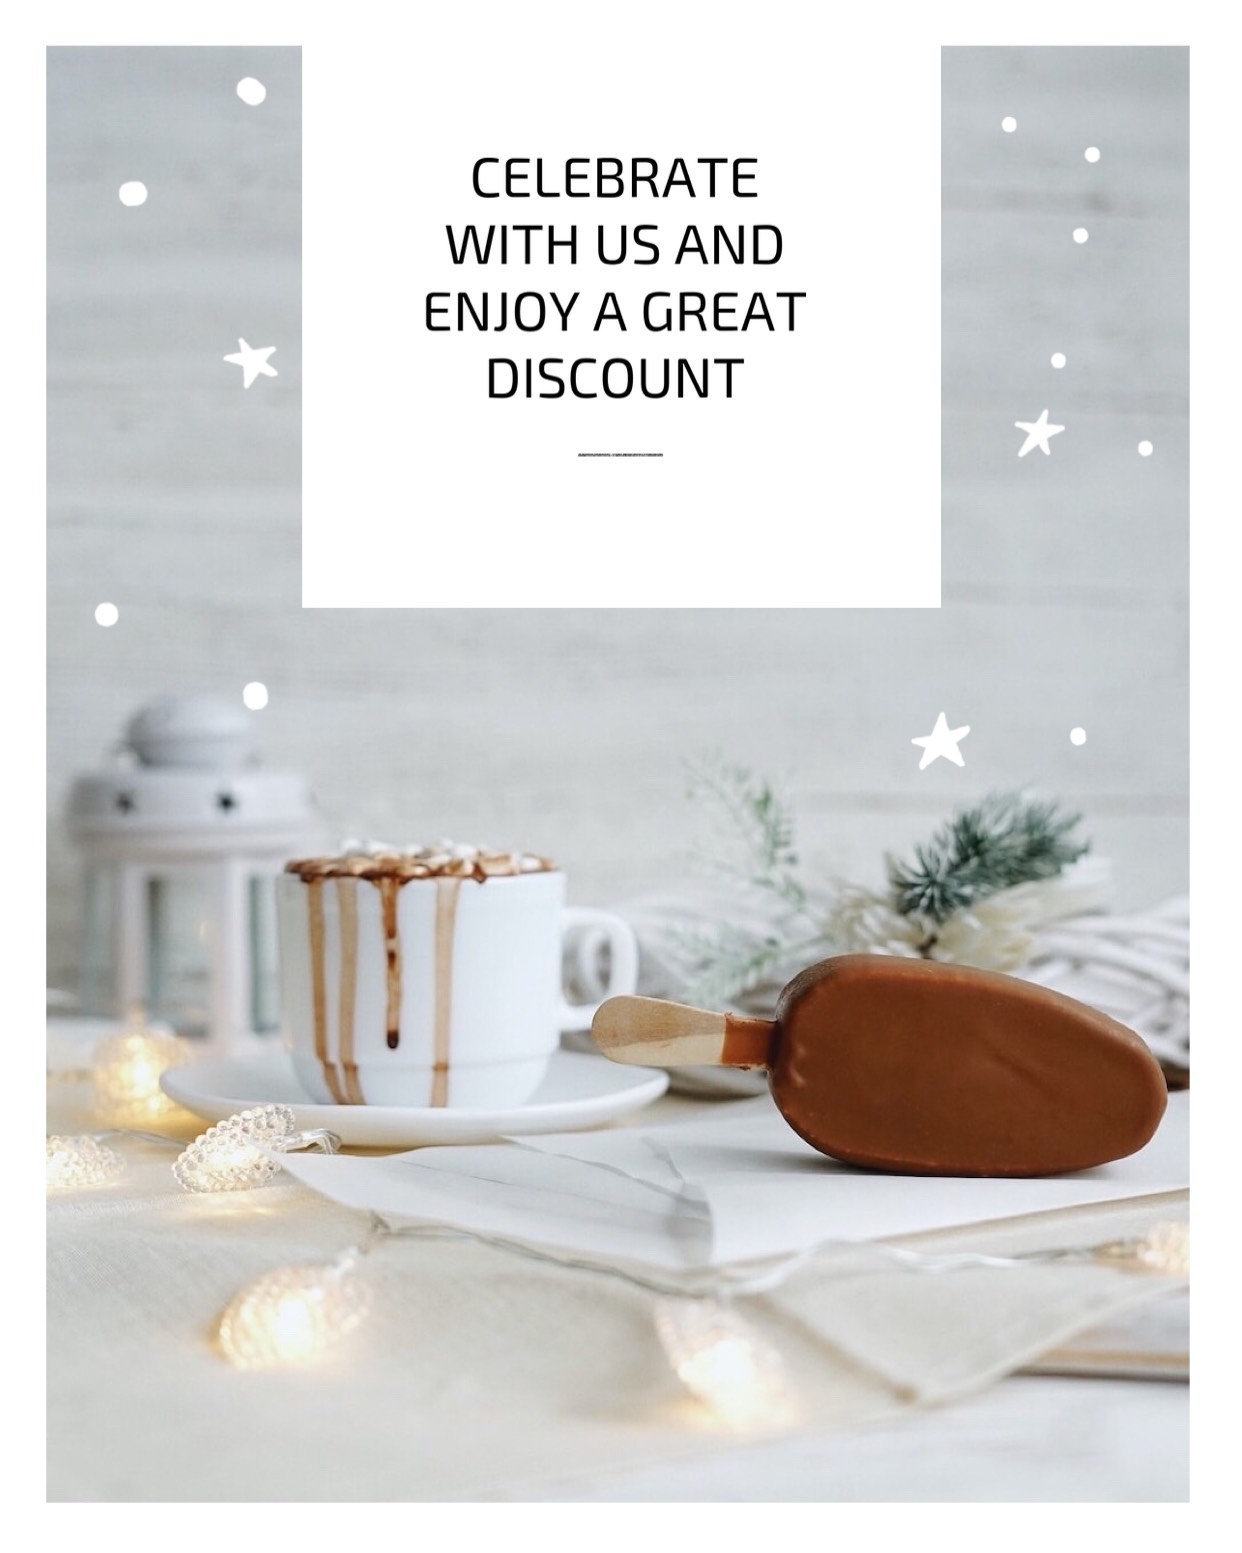 Celebrate with us and enjoy a great discount hot chocolate and ice cream Happy New Year template